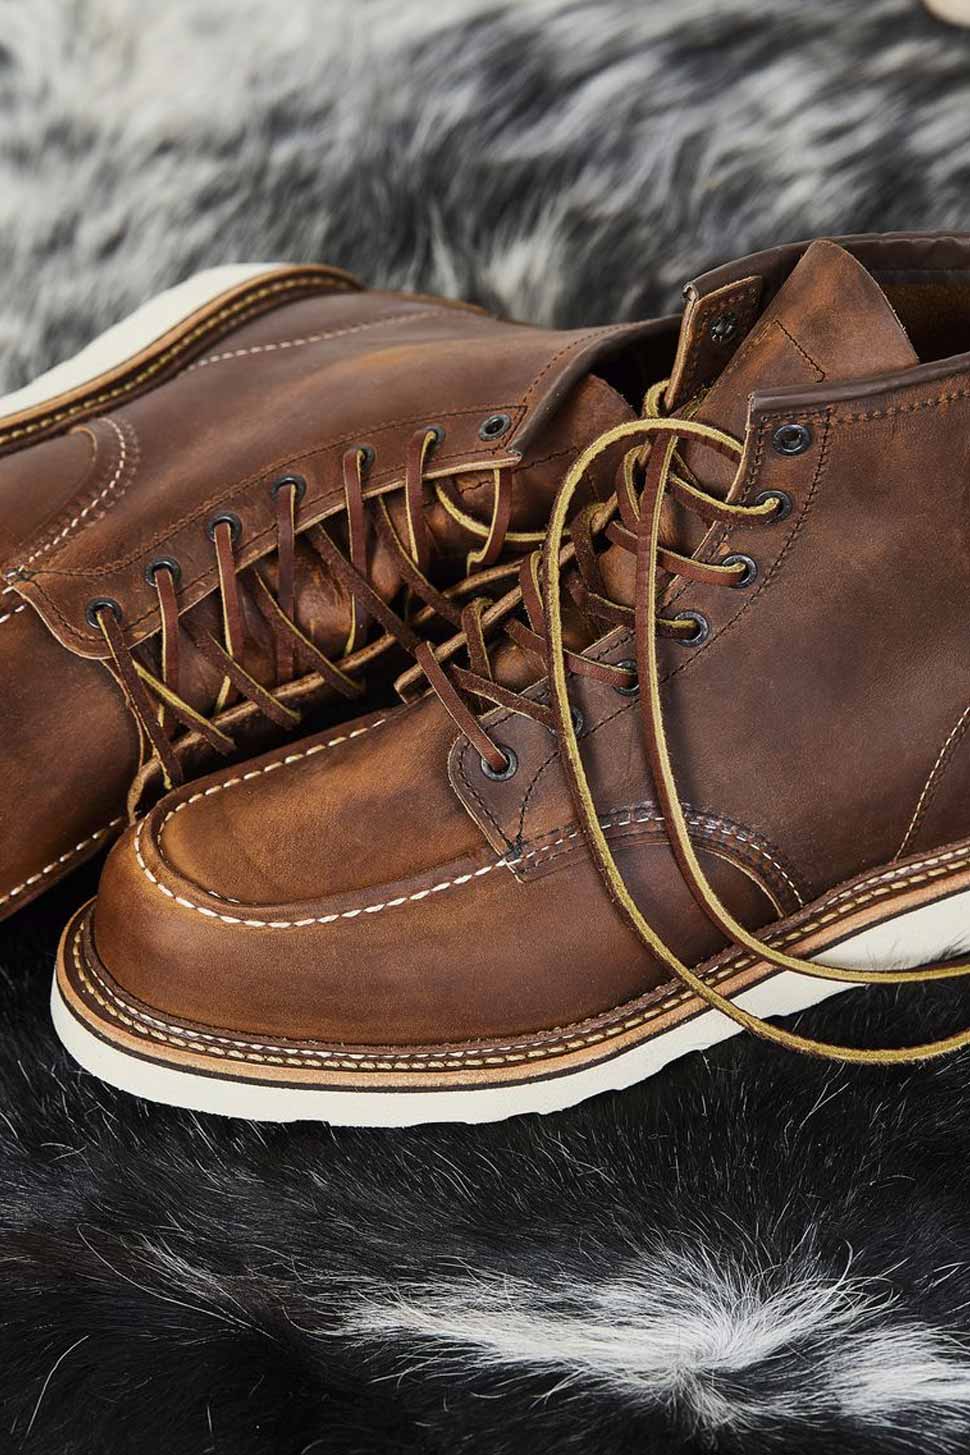 Red Wing Heritage Moc Toe Boot is a Classic